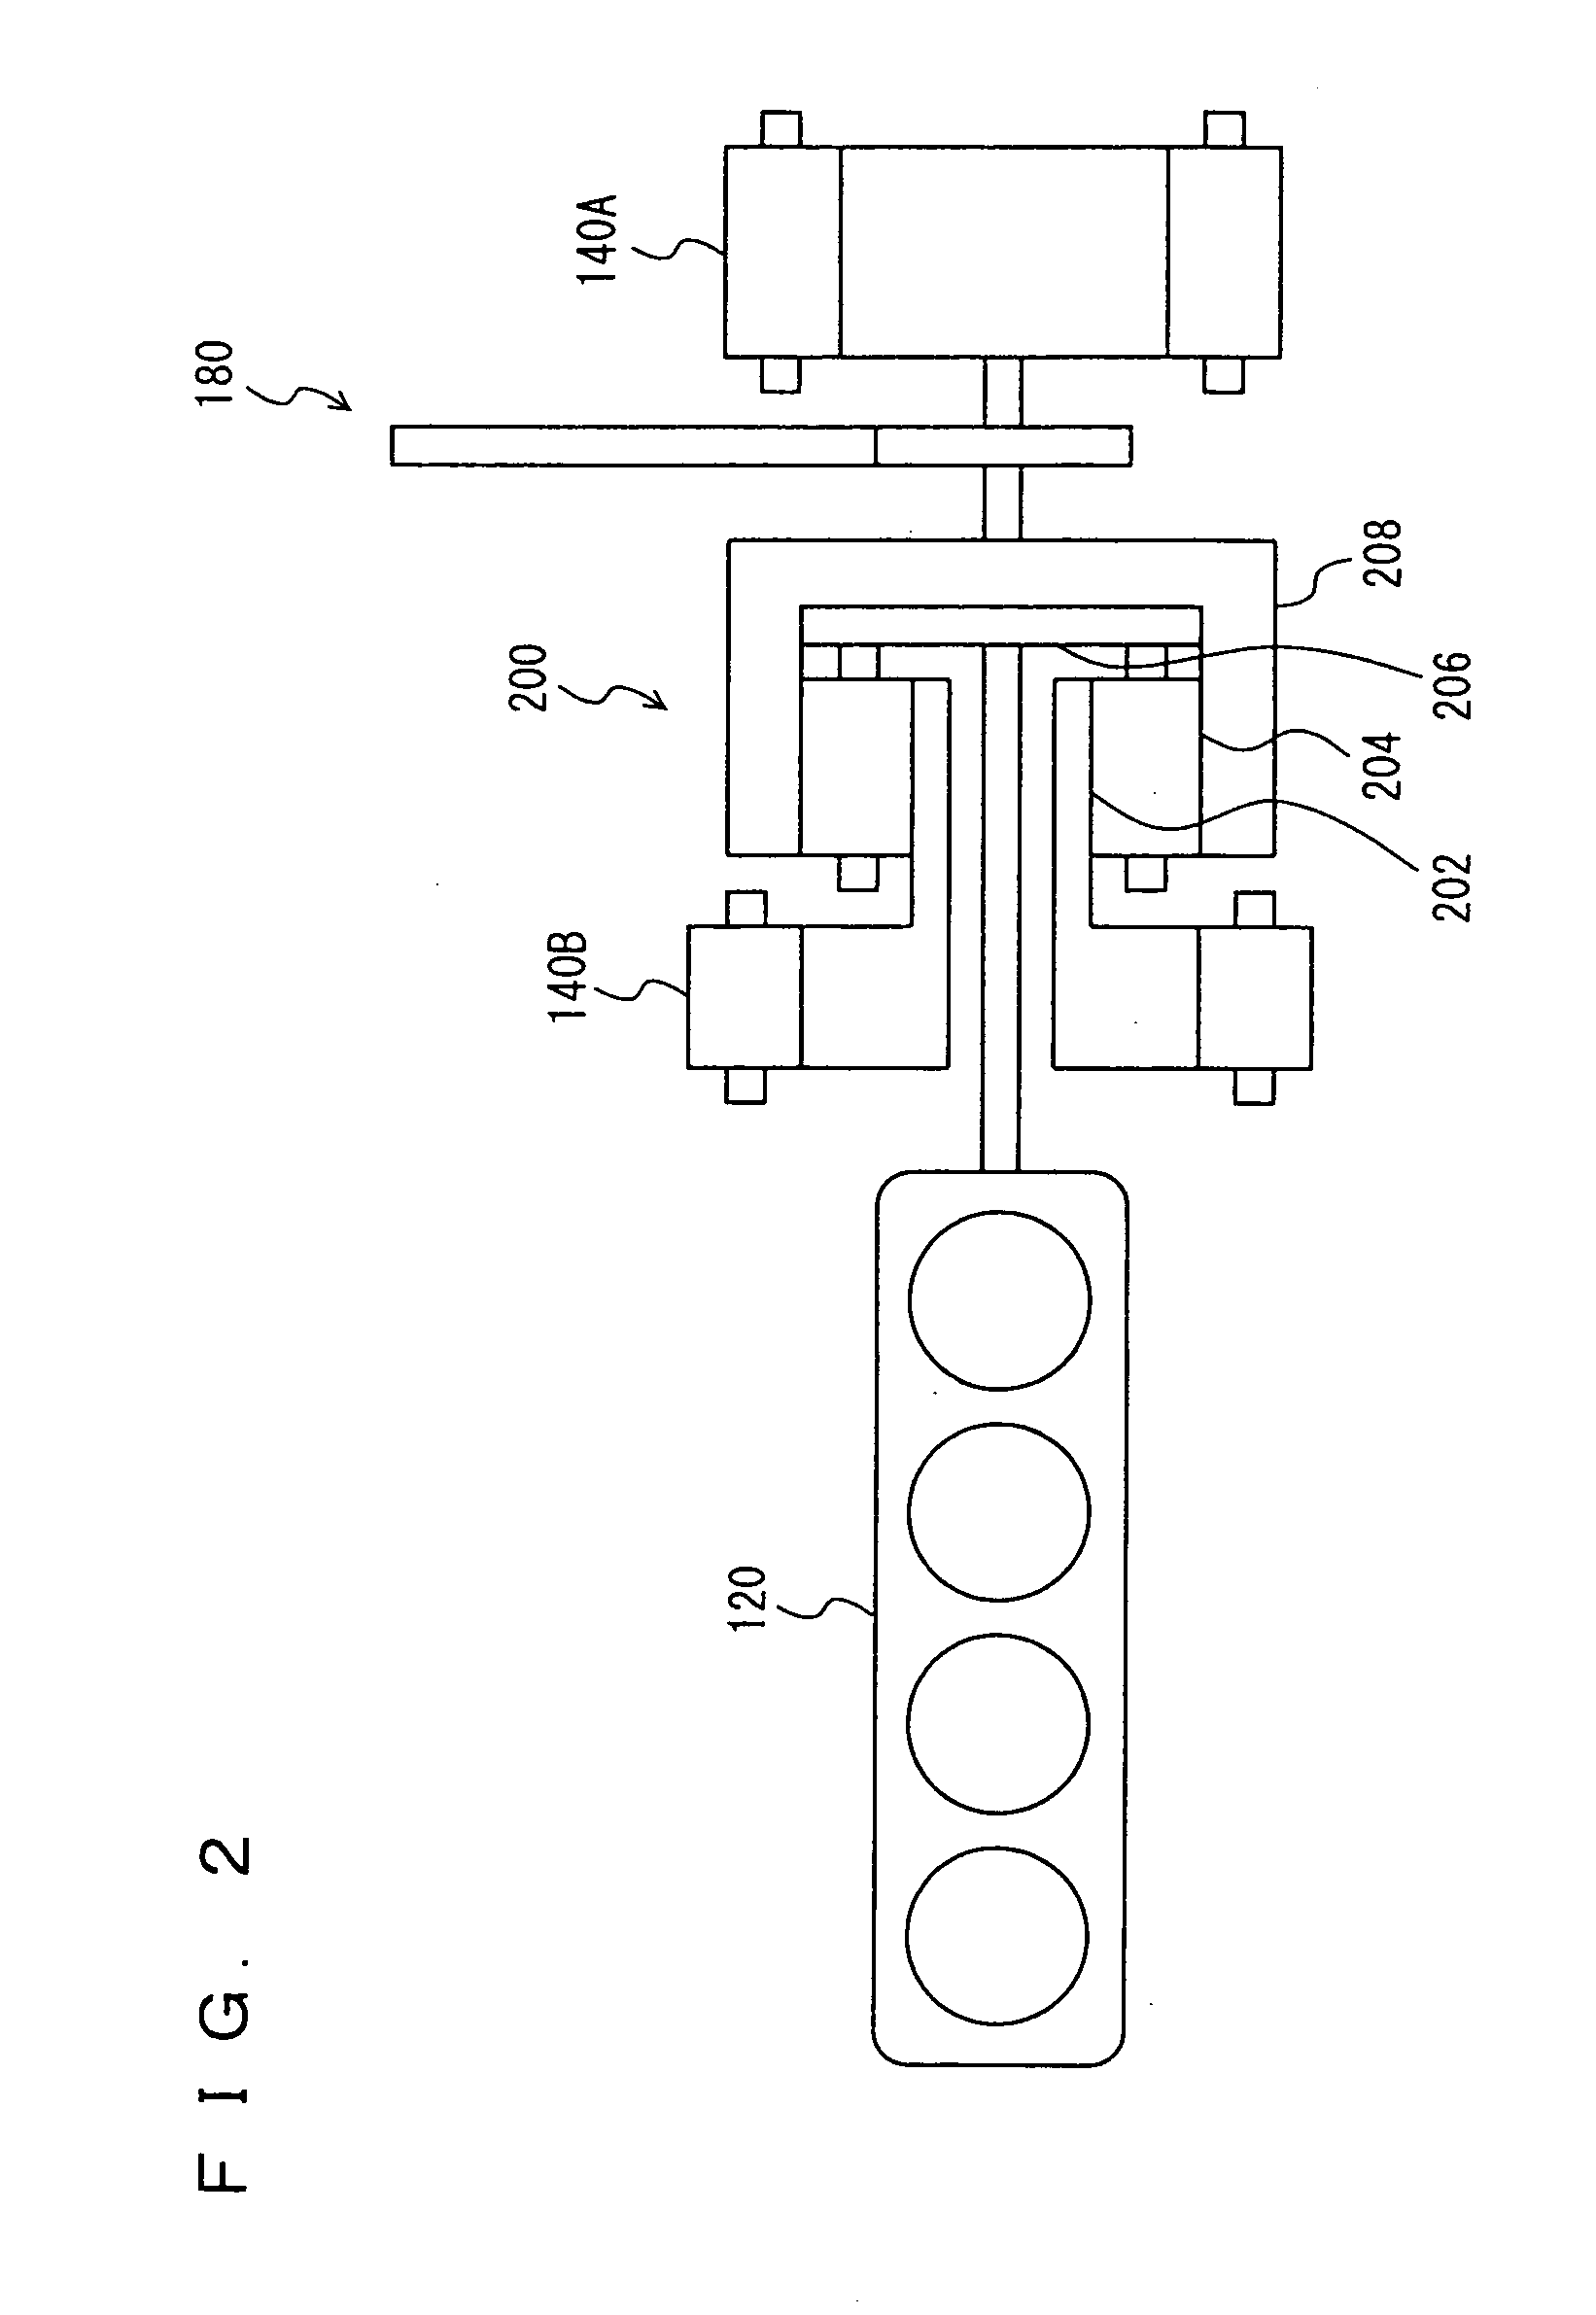 Control device of power supply circuit